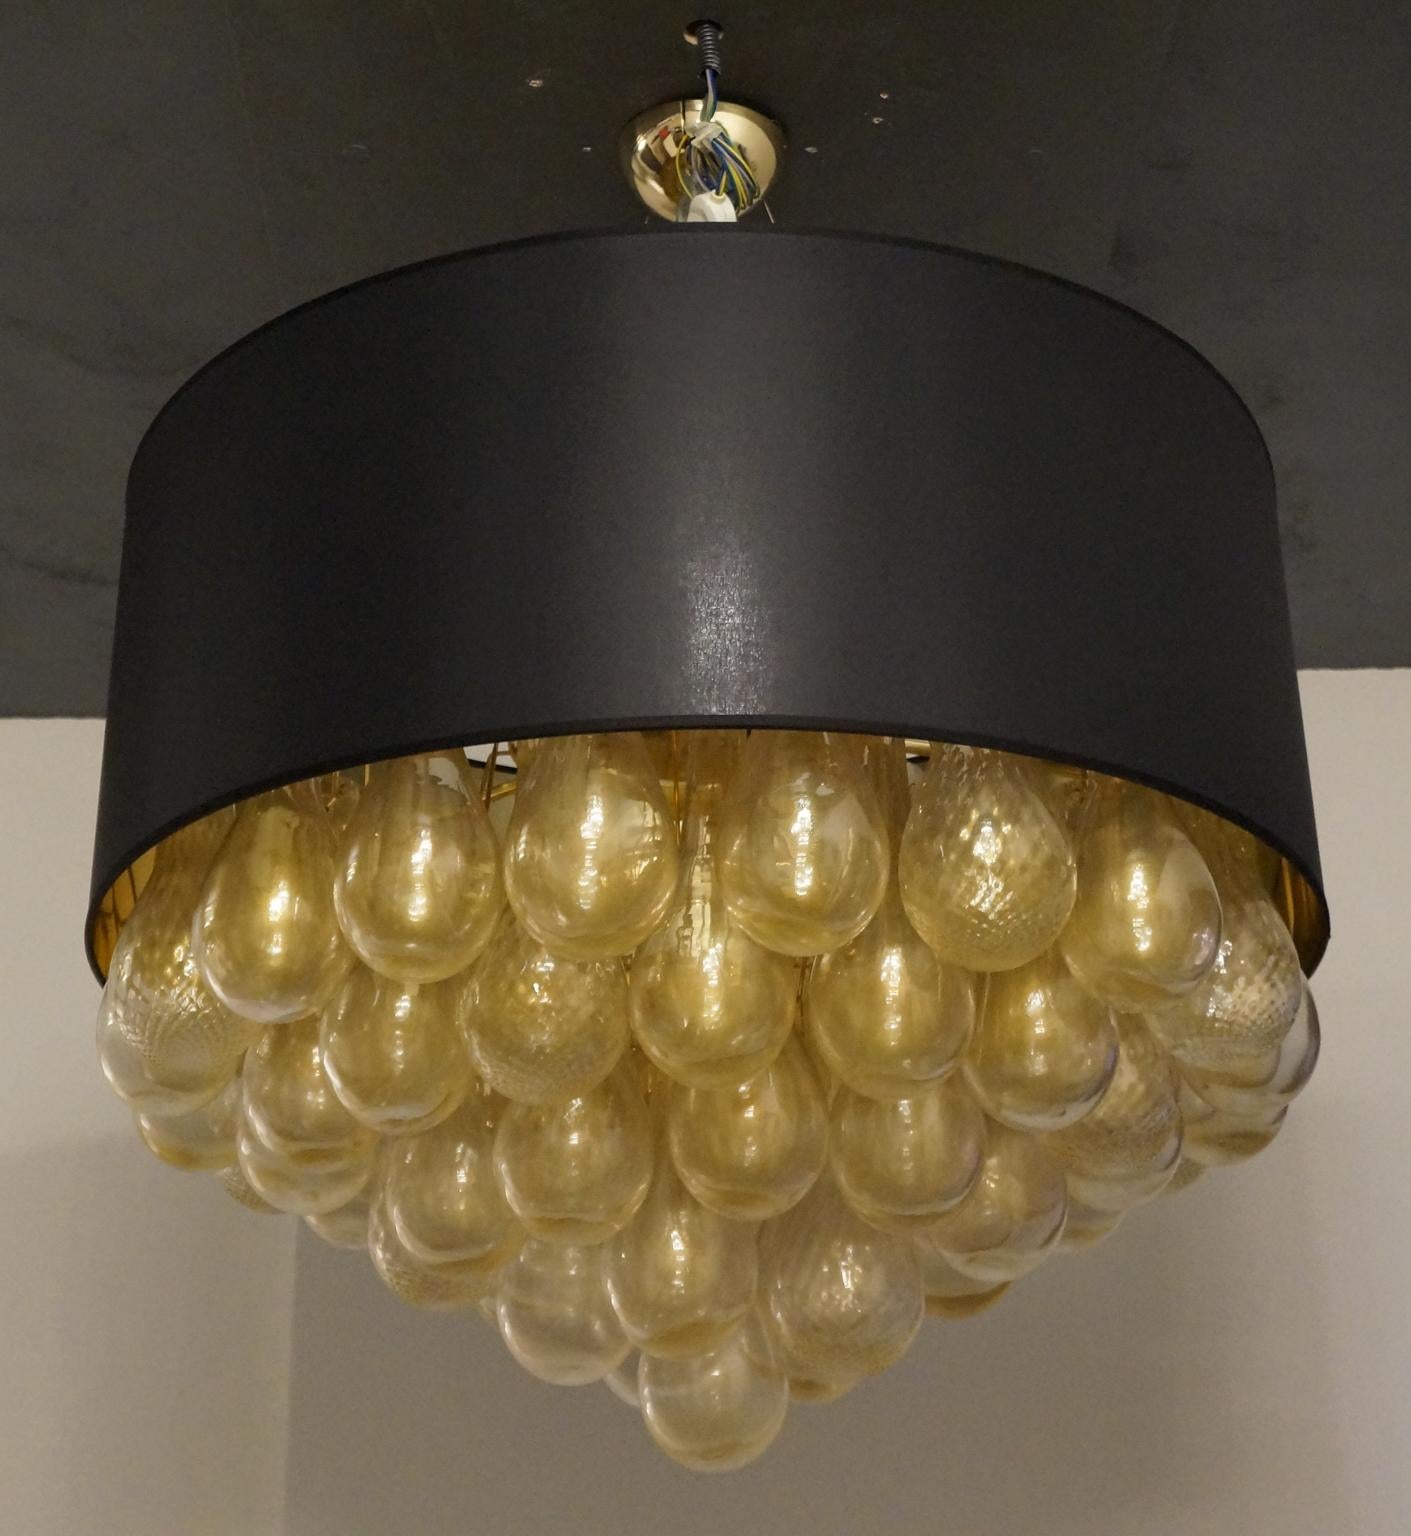 Alberto Donà Mid-Century Modern Gold Leaf Murano Glass Chandelier Gocce, 1990s For Sale 5